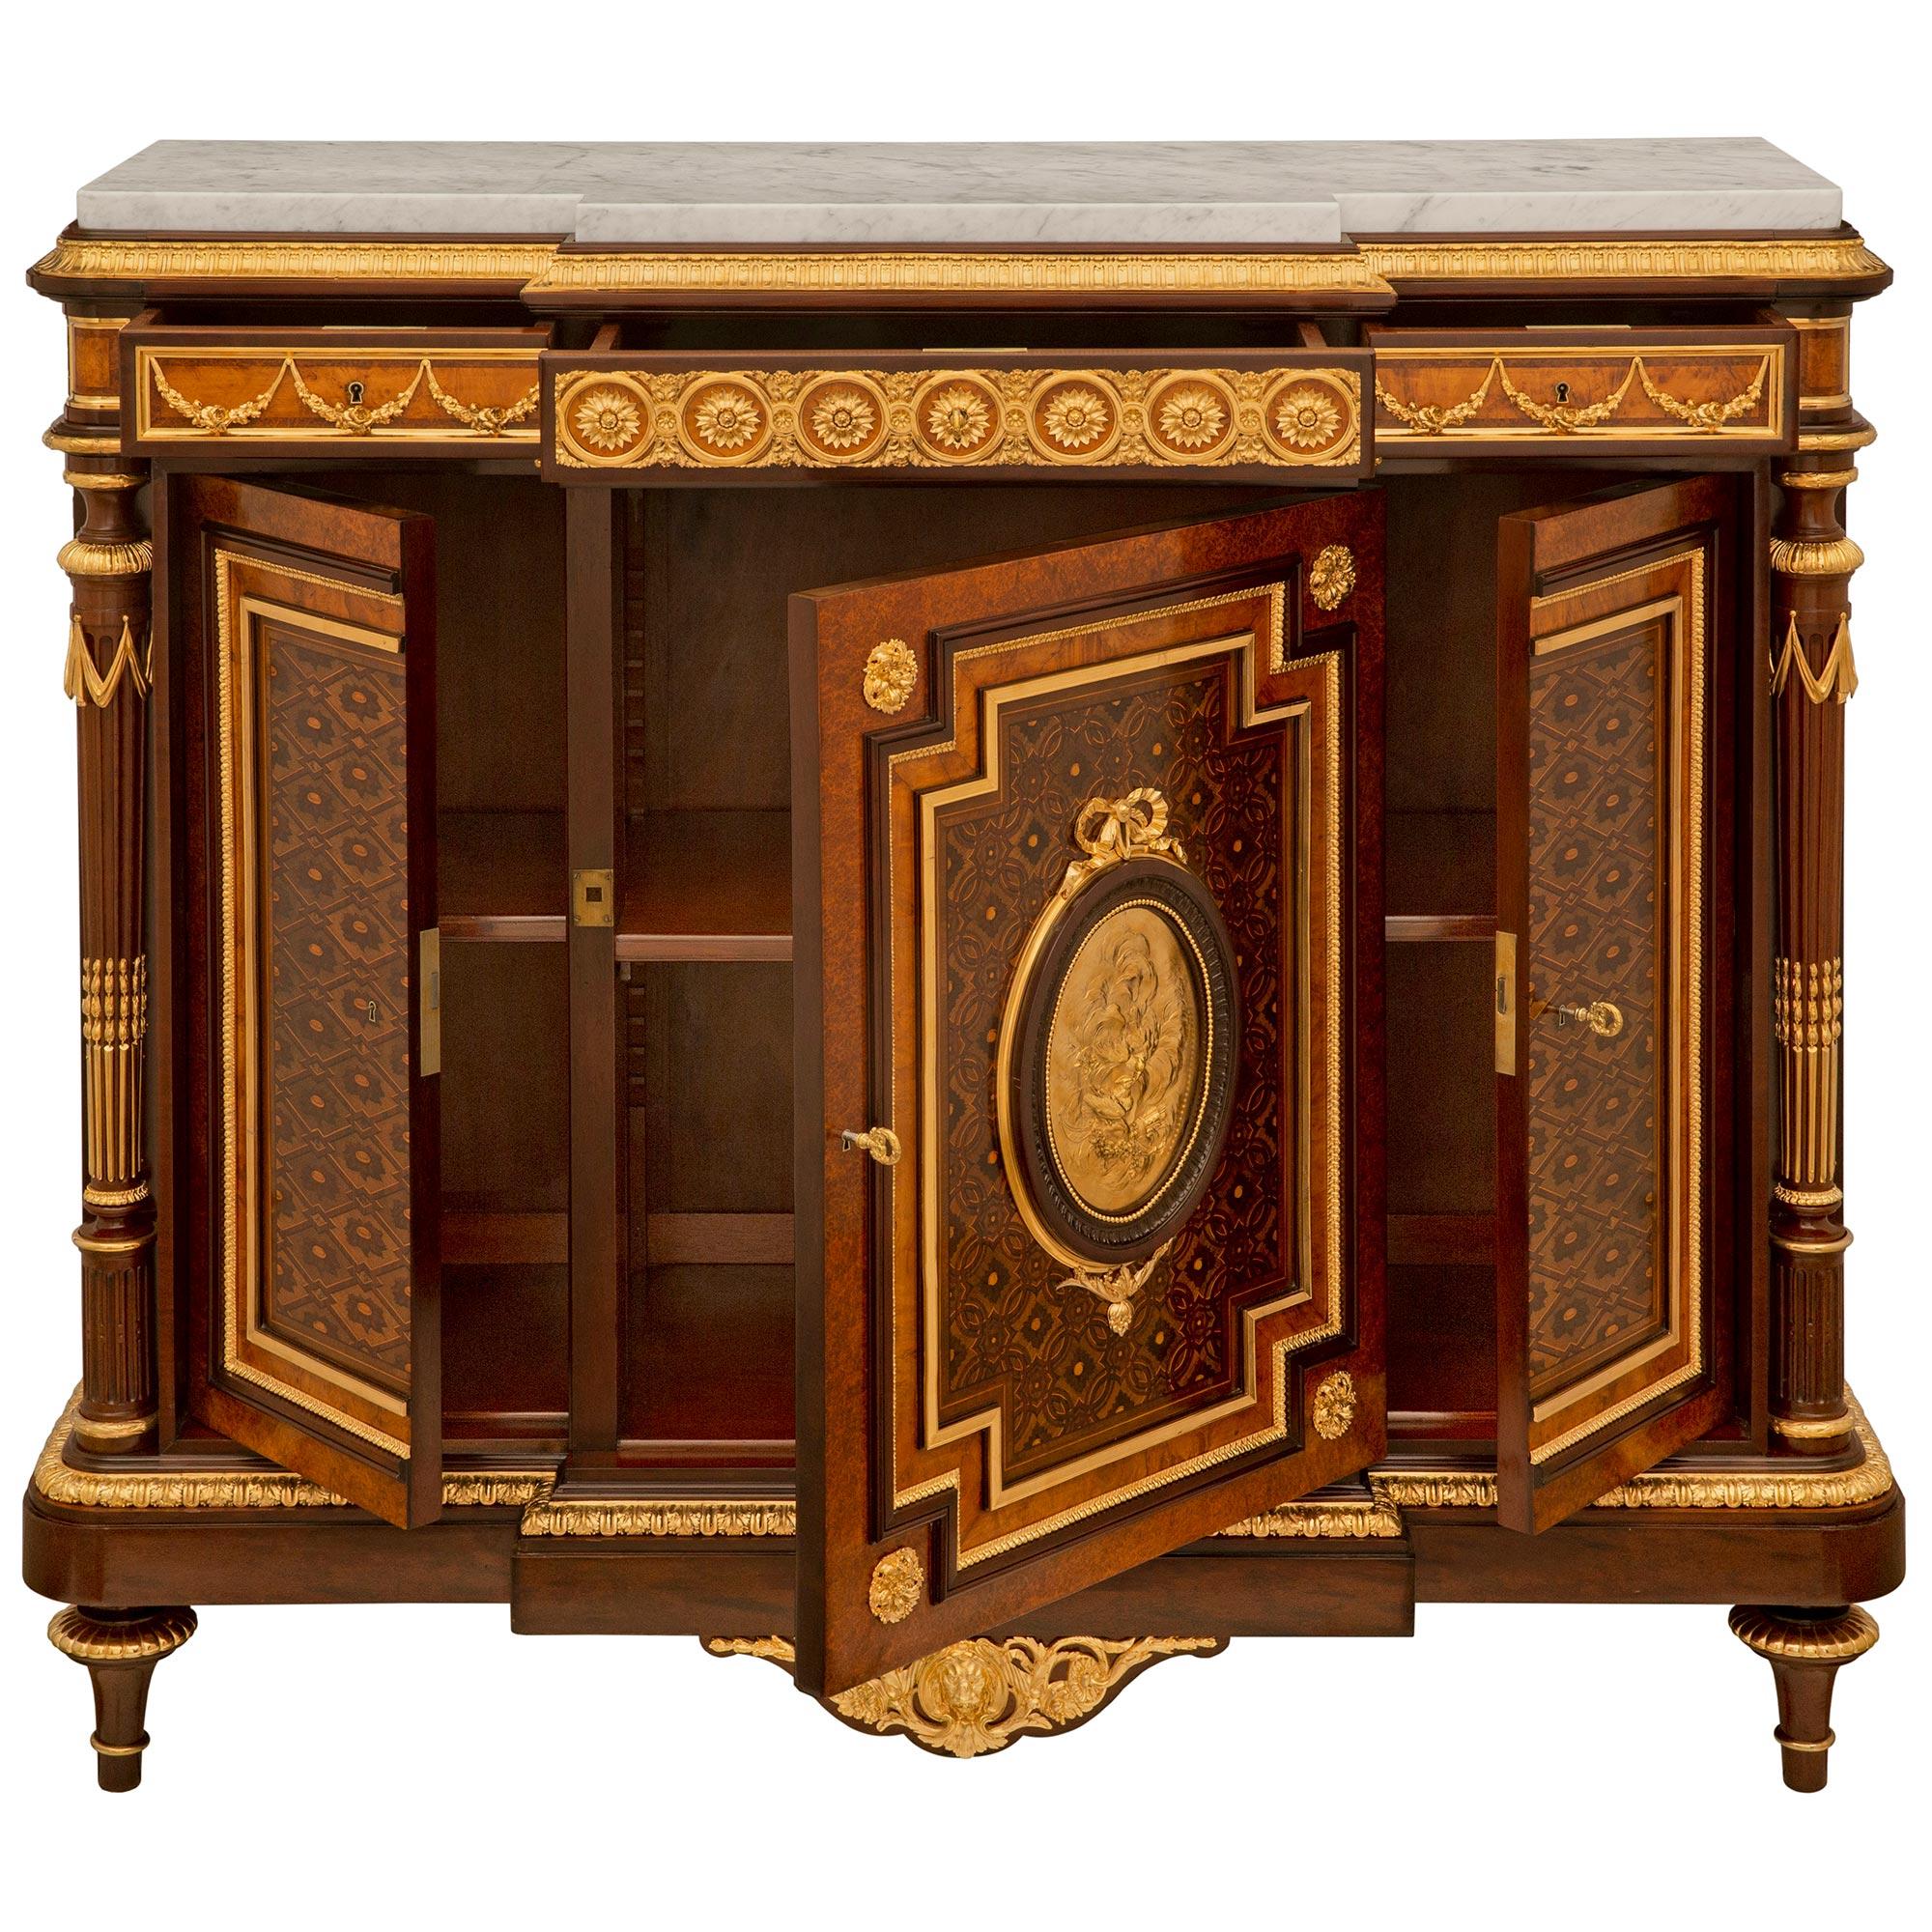 An exceptional and high quality French 19th century Louis XVI st. Belle Époque period Mahogany, Kingwood, Tulipwood, burl wood, ormolu and white Carrara marble cabinet possibly by Maison Krieger. The three door three drawer meuble à hauteur d'appui